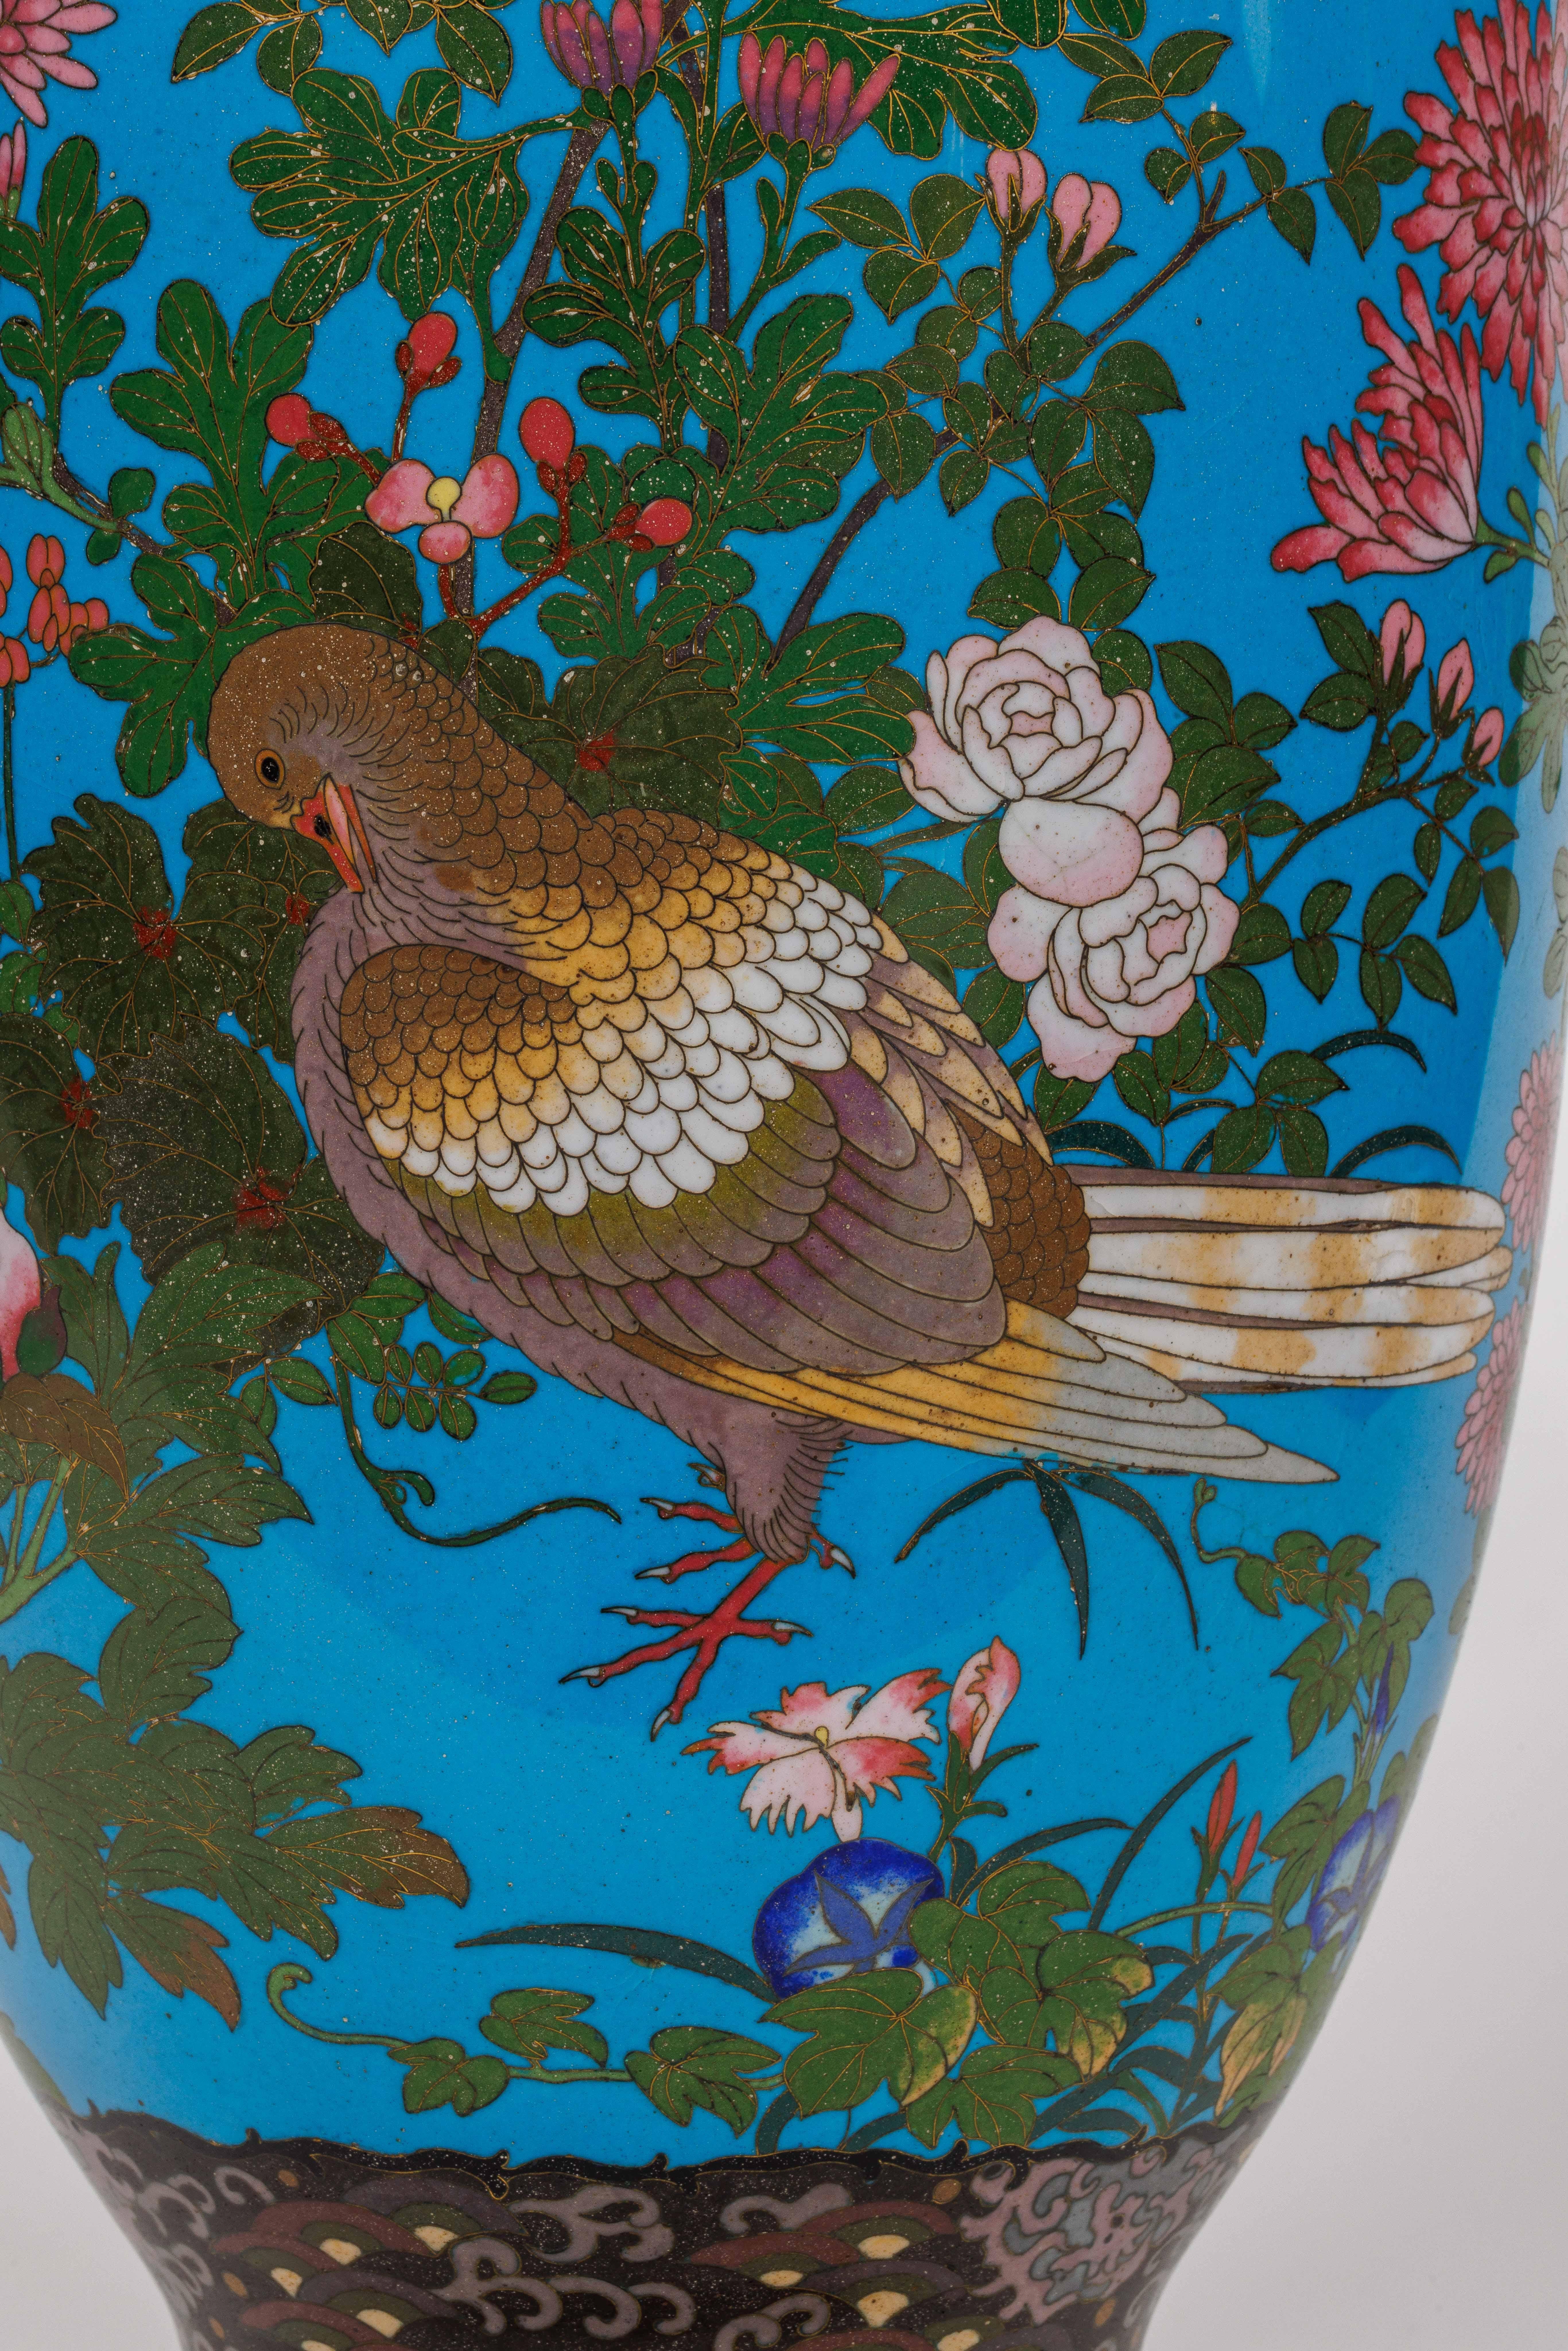 Large Pair of Meiji Period Japanese Cloisonne Enamel Vases Attributed to Goto In Good Condition For Sale In New York, NY